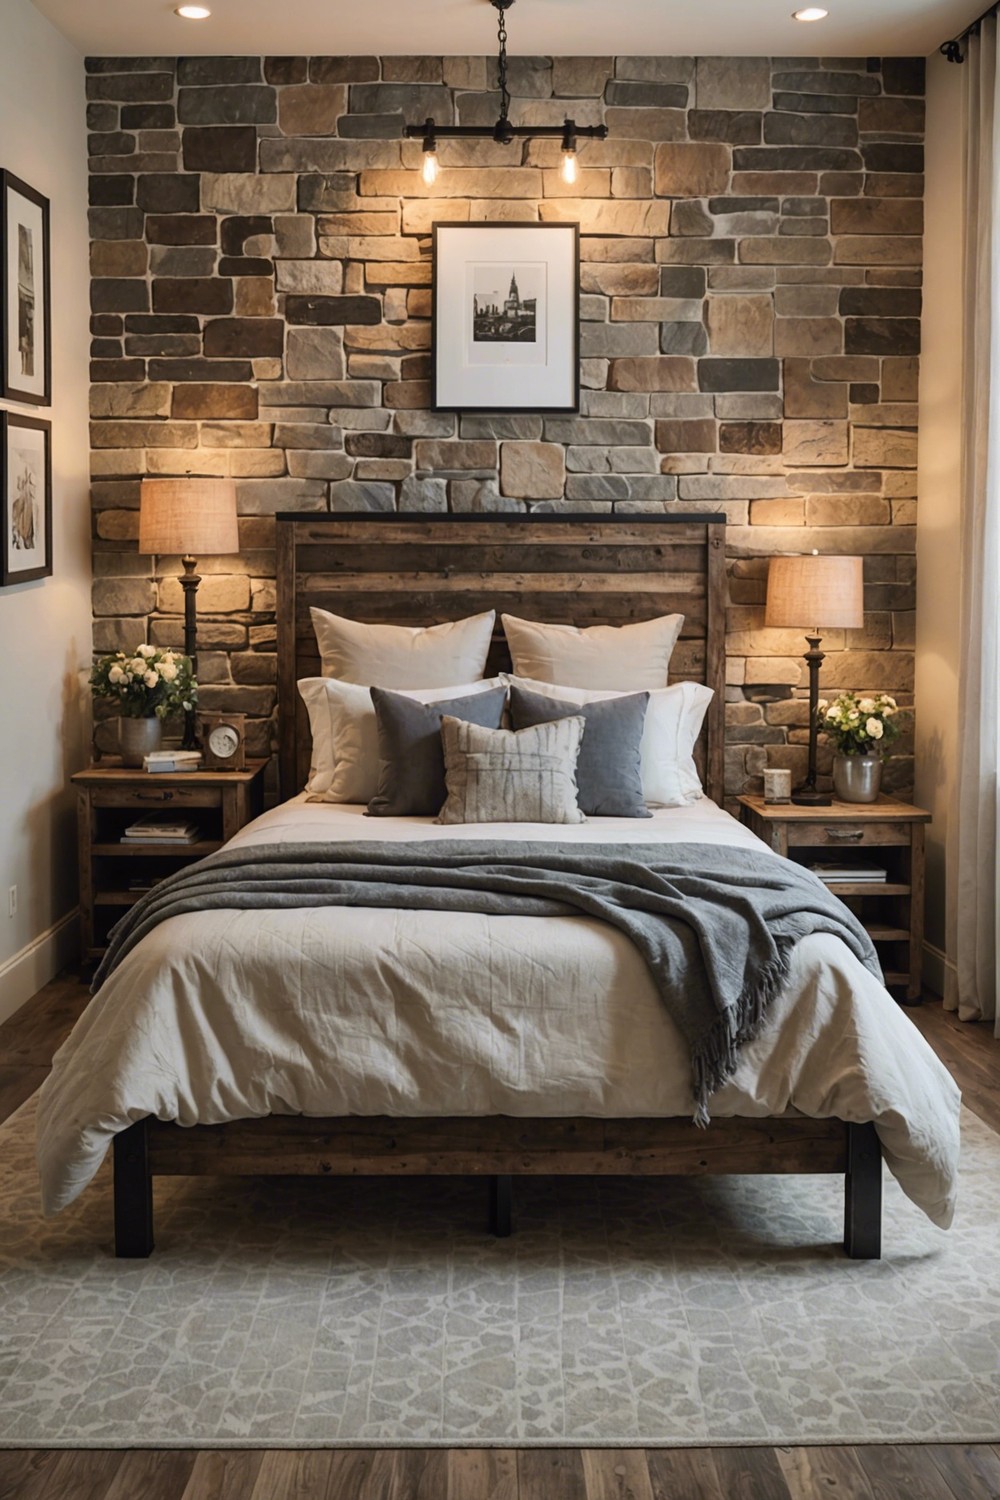 Rustic-Chic Bed Frames